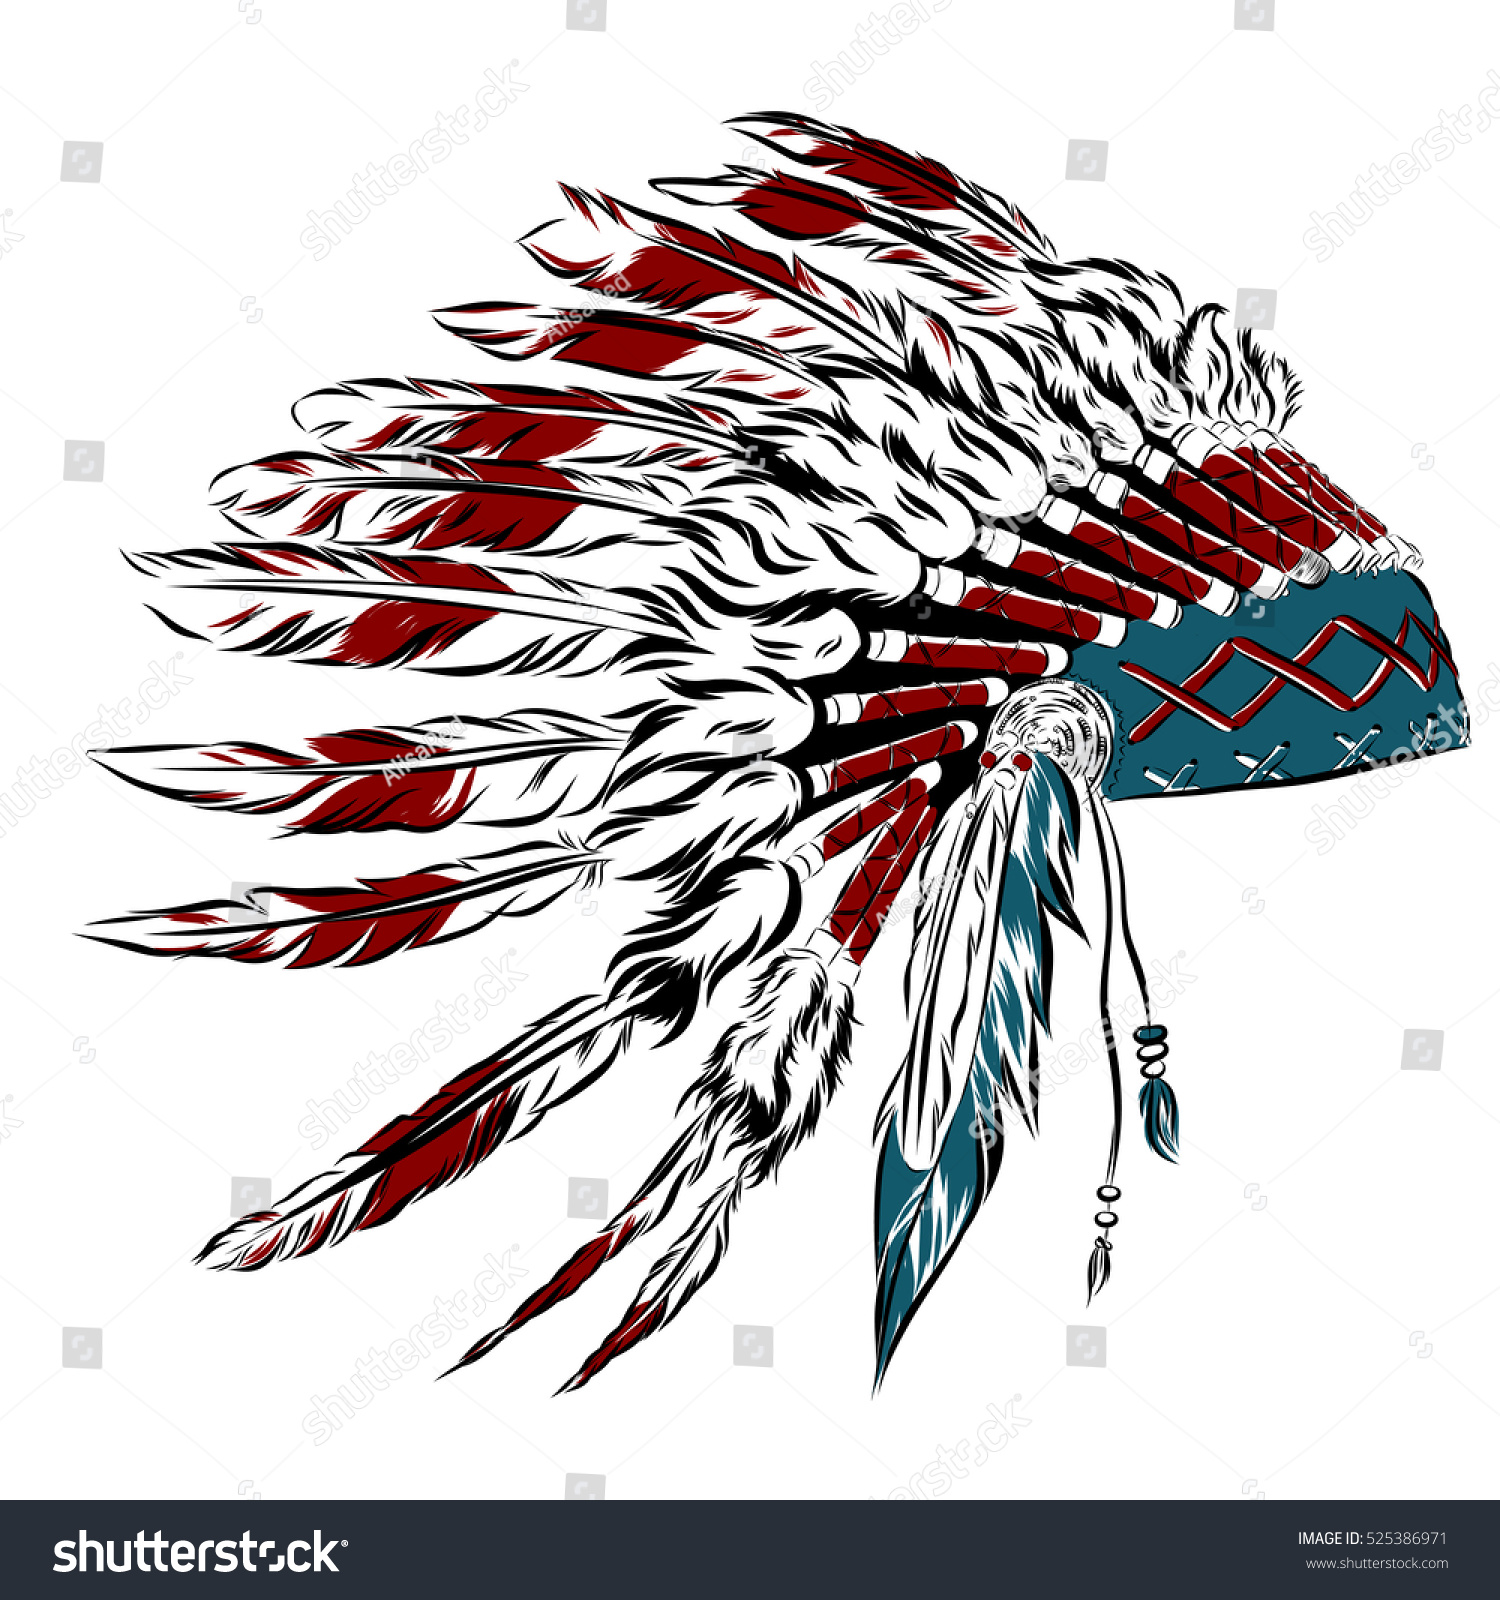 Native American Indian Headdress Feathers Sketch Stock Illustration ...